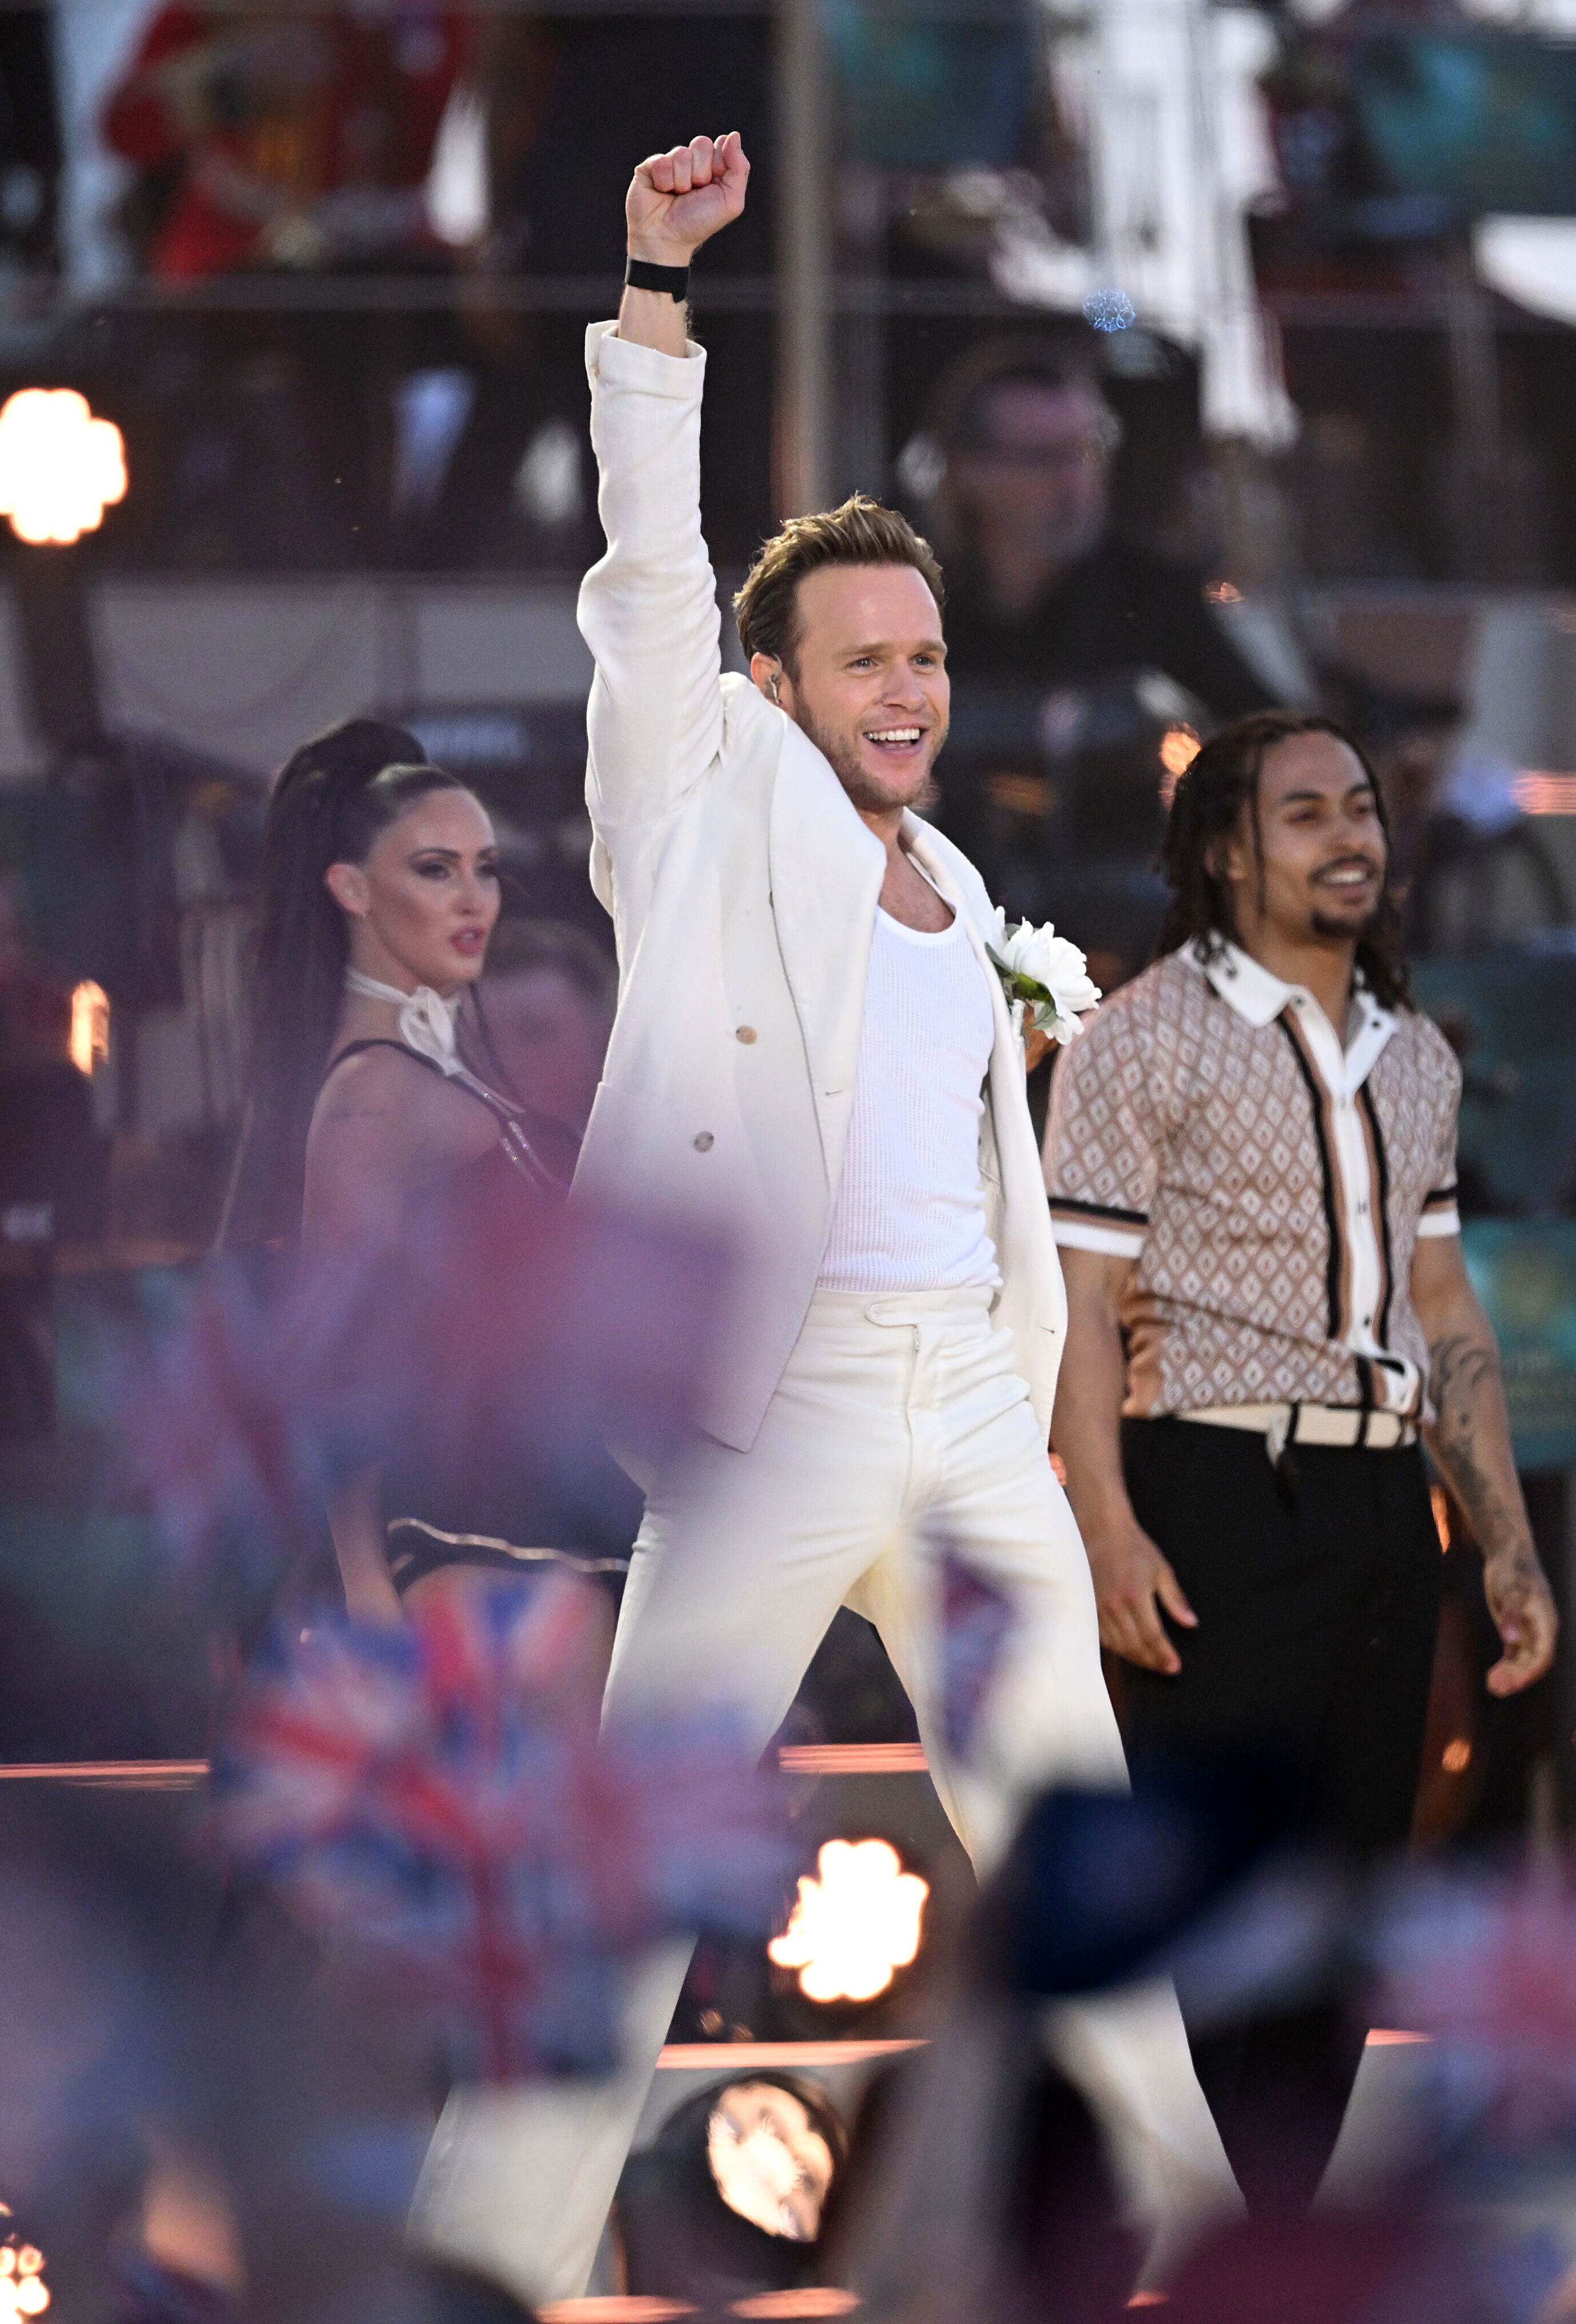 Olly Murs will be leaving The Voice UK after the 2023 series (Leon Neal/PA)